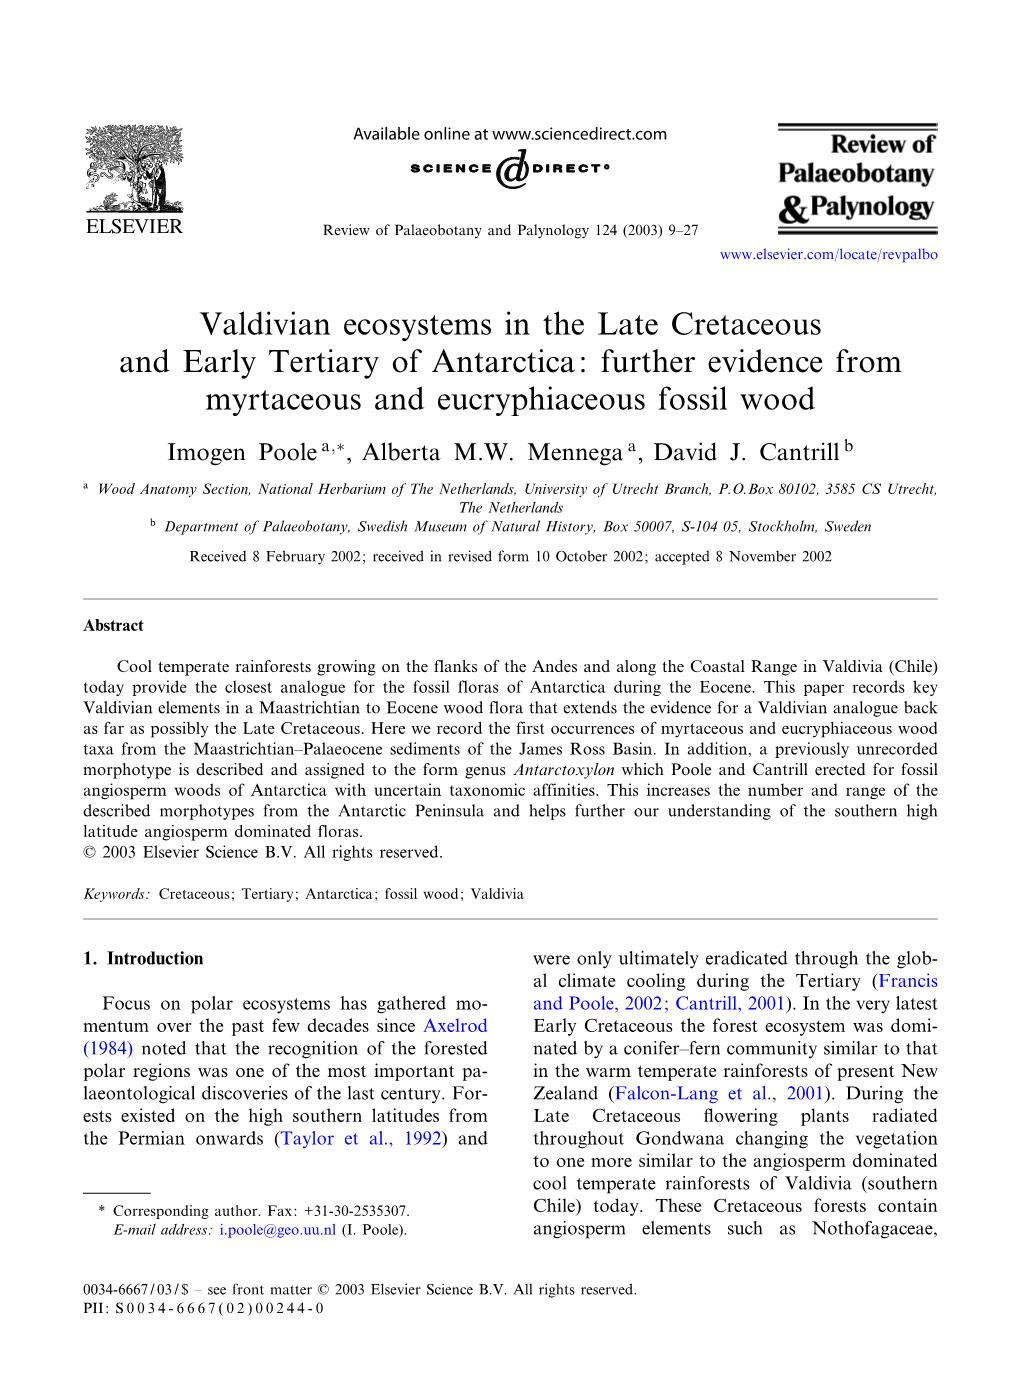 Valdivian Ecosystems in the Late Cretaceous and Early Tertiary of Antarctica: Further Evidence from Myrtaceous and Eucryphiaceous Fossil Wood